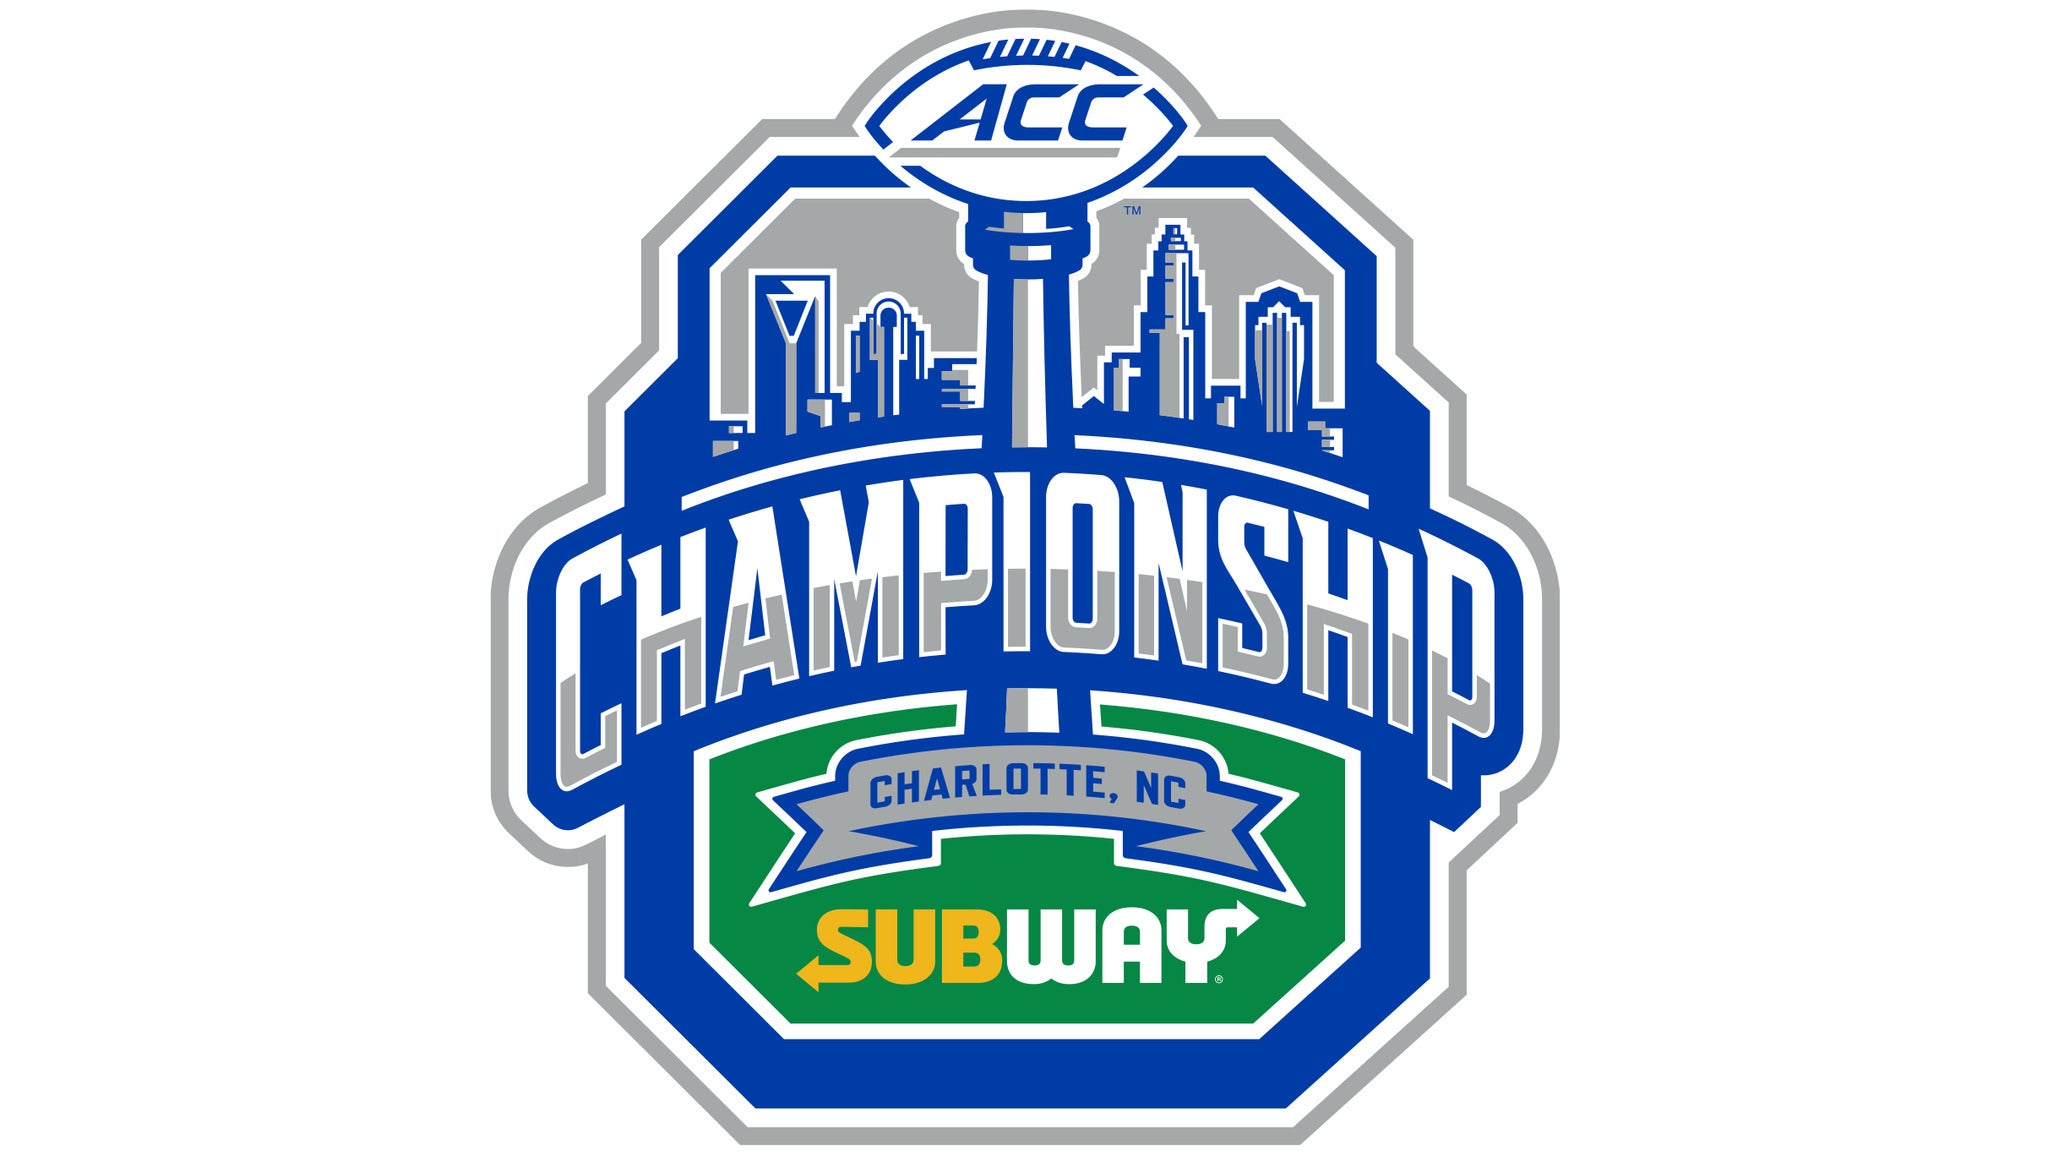 ACC Football Championship Game December 03, 2022 at Bank of America